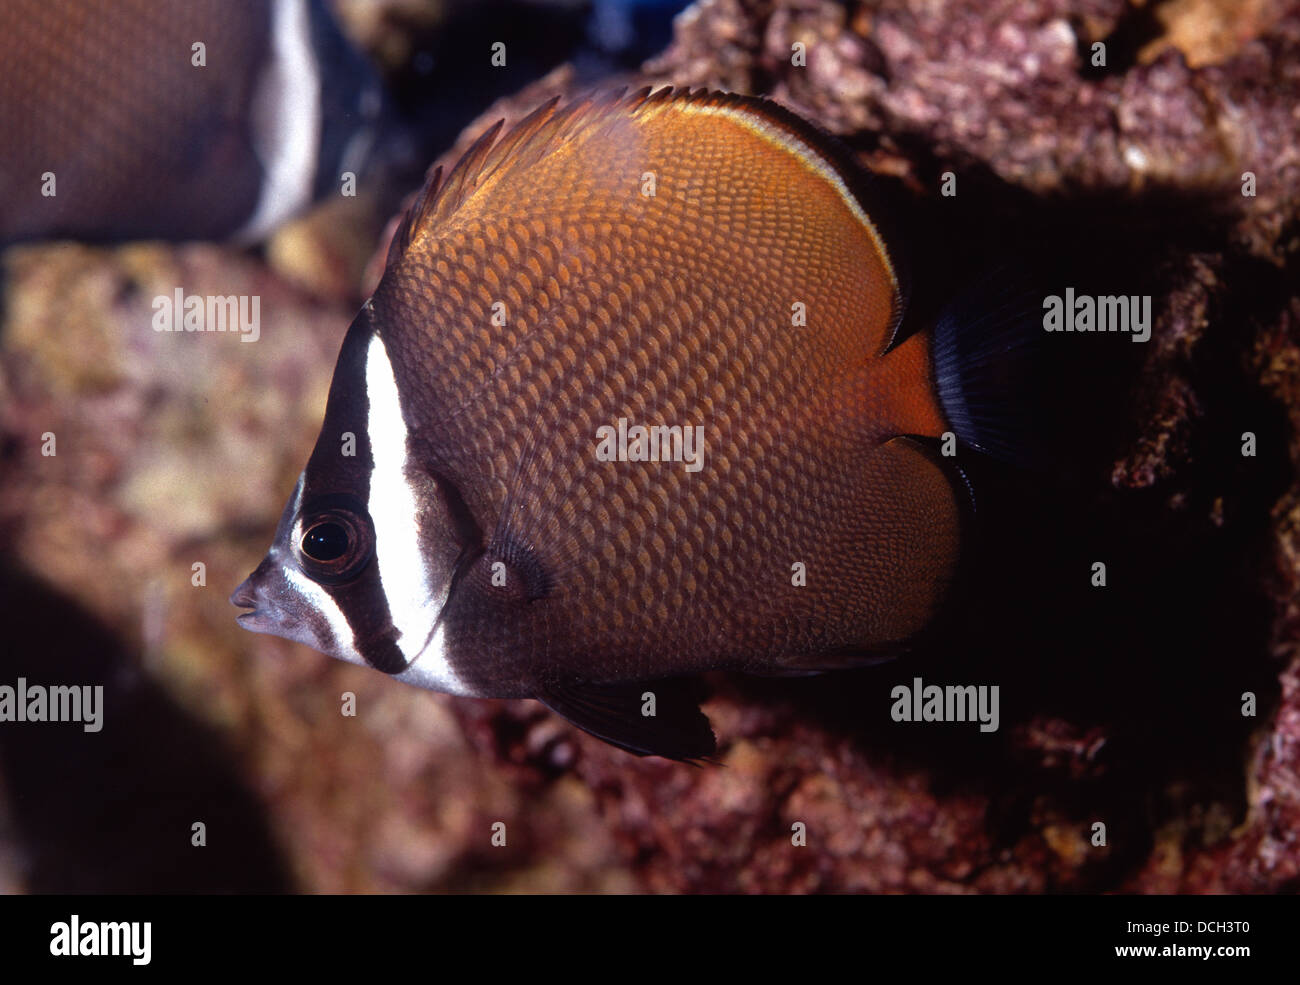 Redtail butterflyfish, Chaetodon collare, Chaetodontidae, Indo-pacific Ocean, Stock Photo